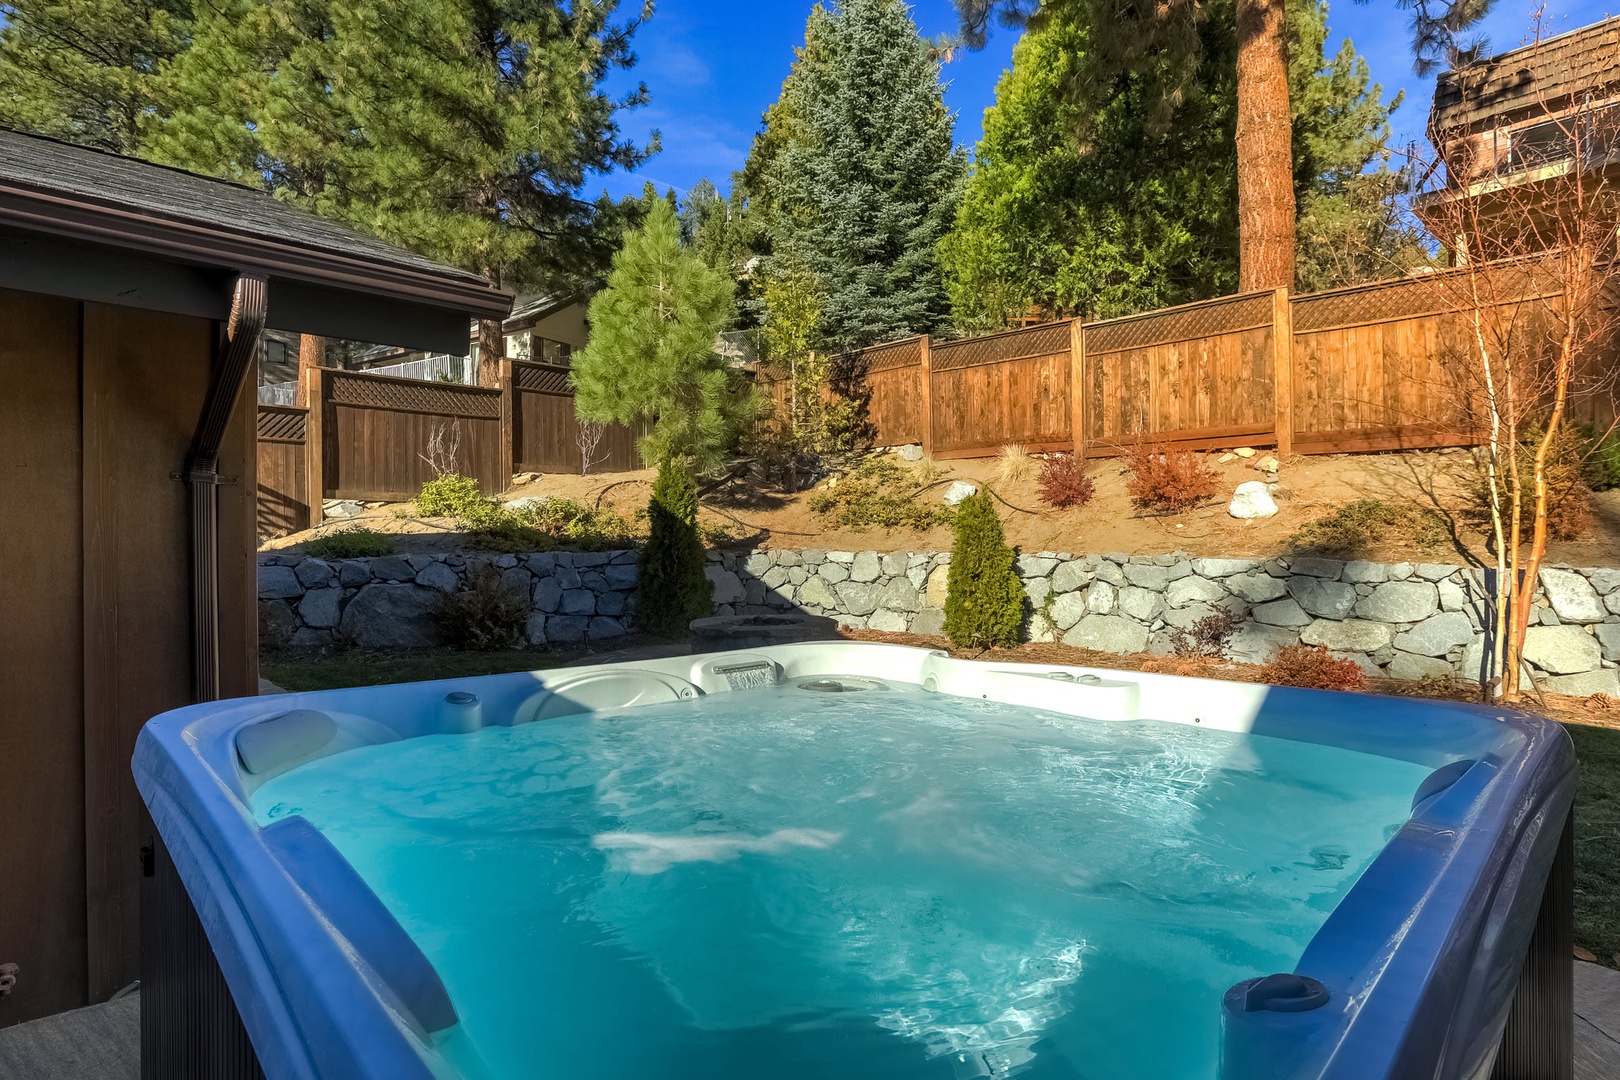 Fenced in backyard with firepit, hot tub, gas BBQ